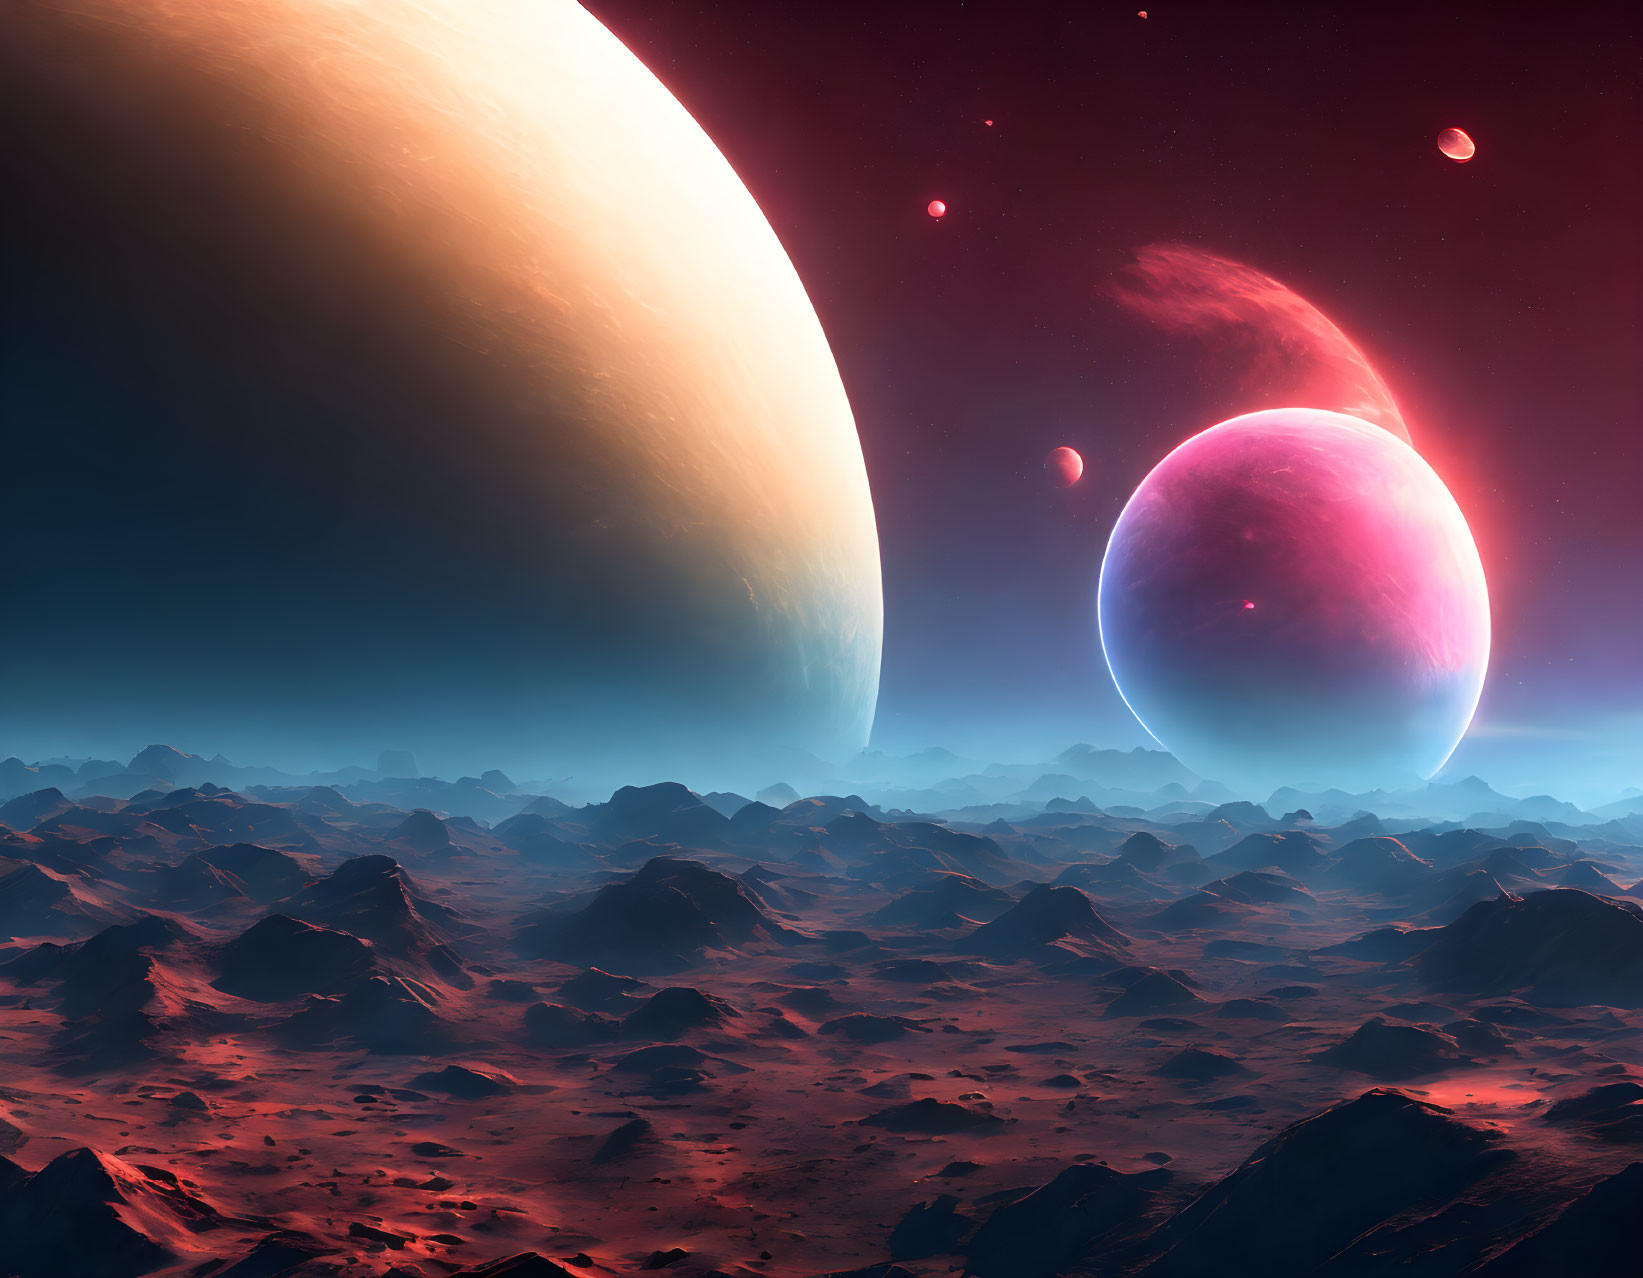 Sci-fi landscape with rocky terrain under a red sky and two celestial bodies.